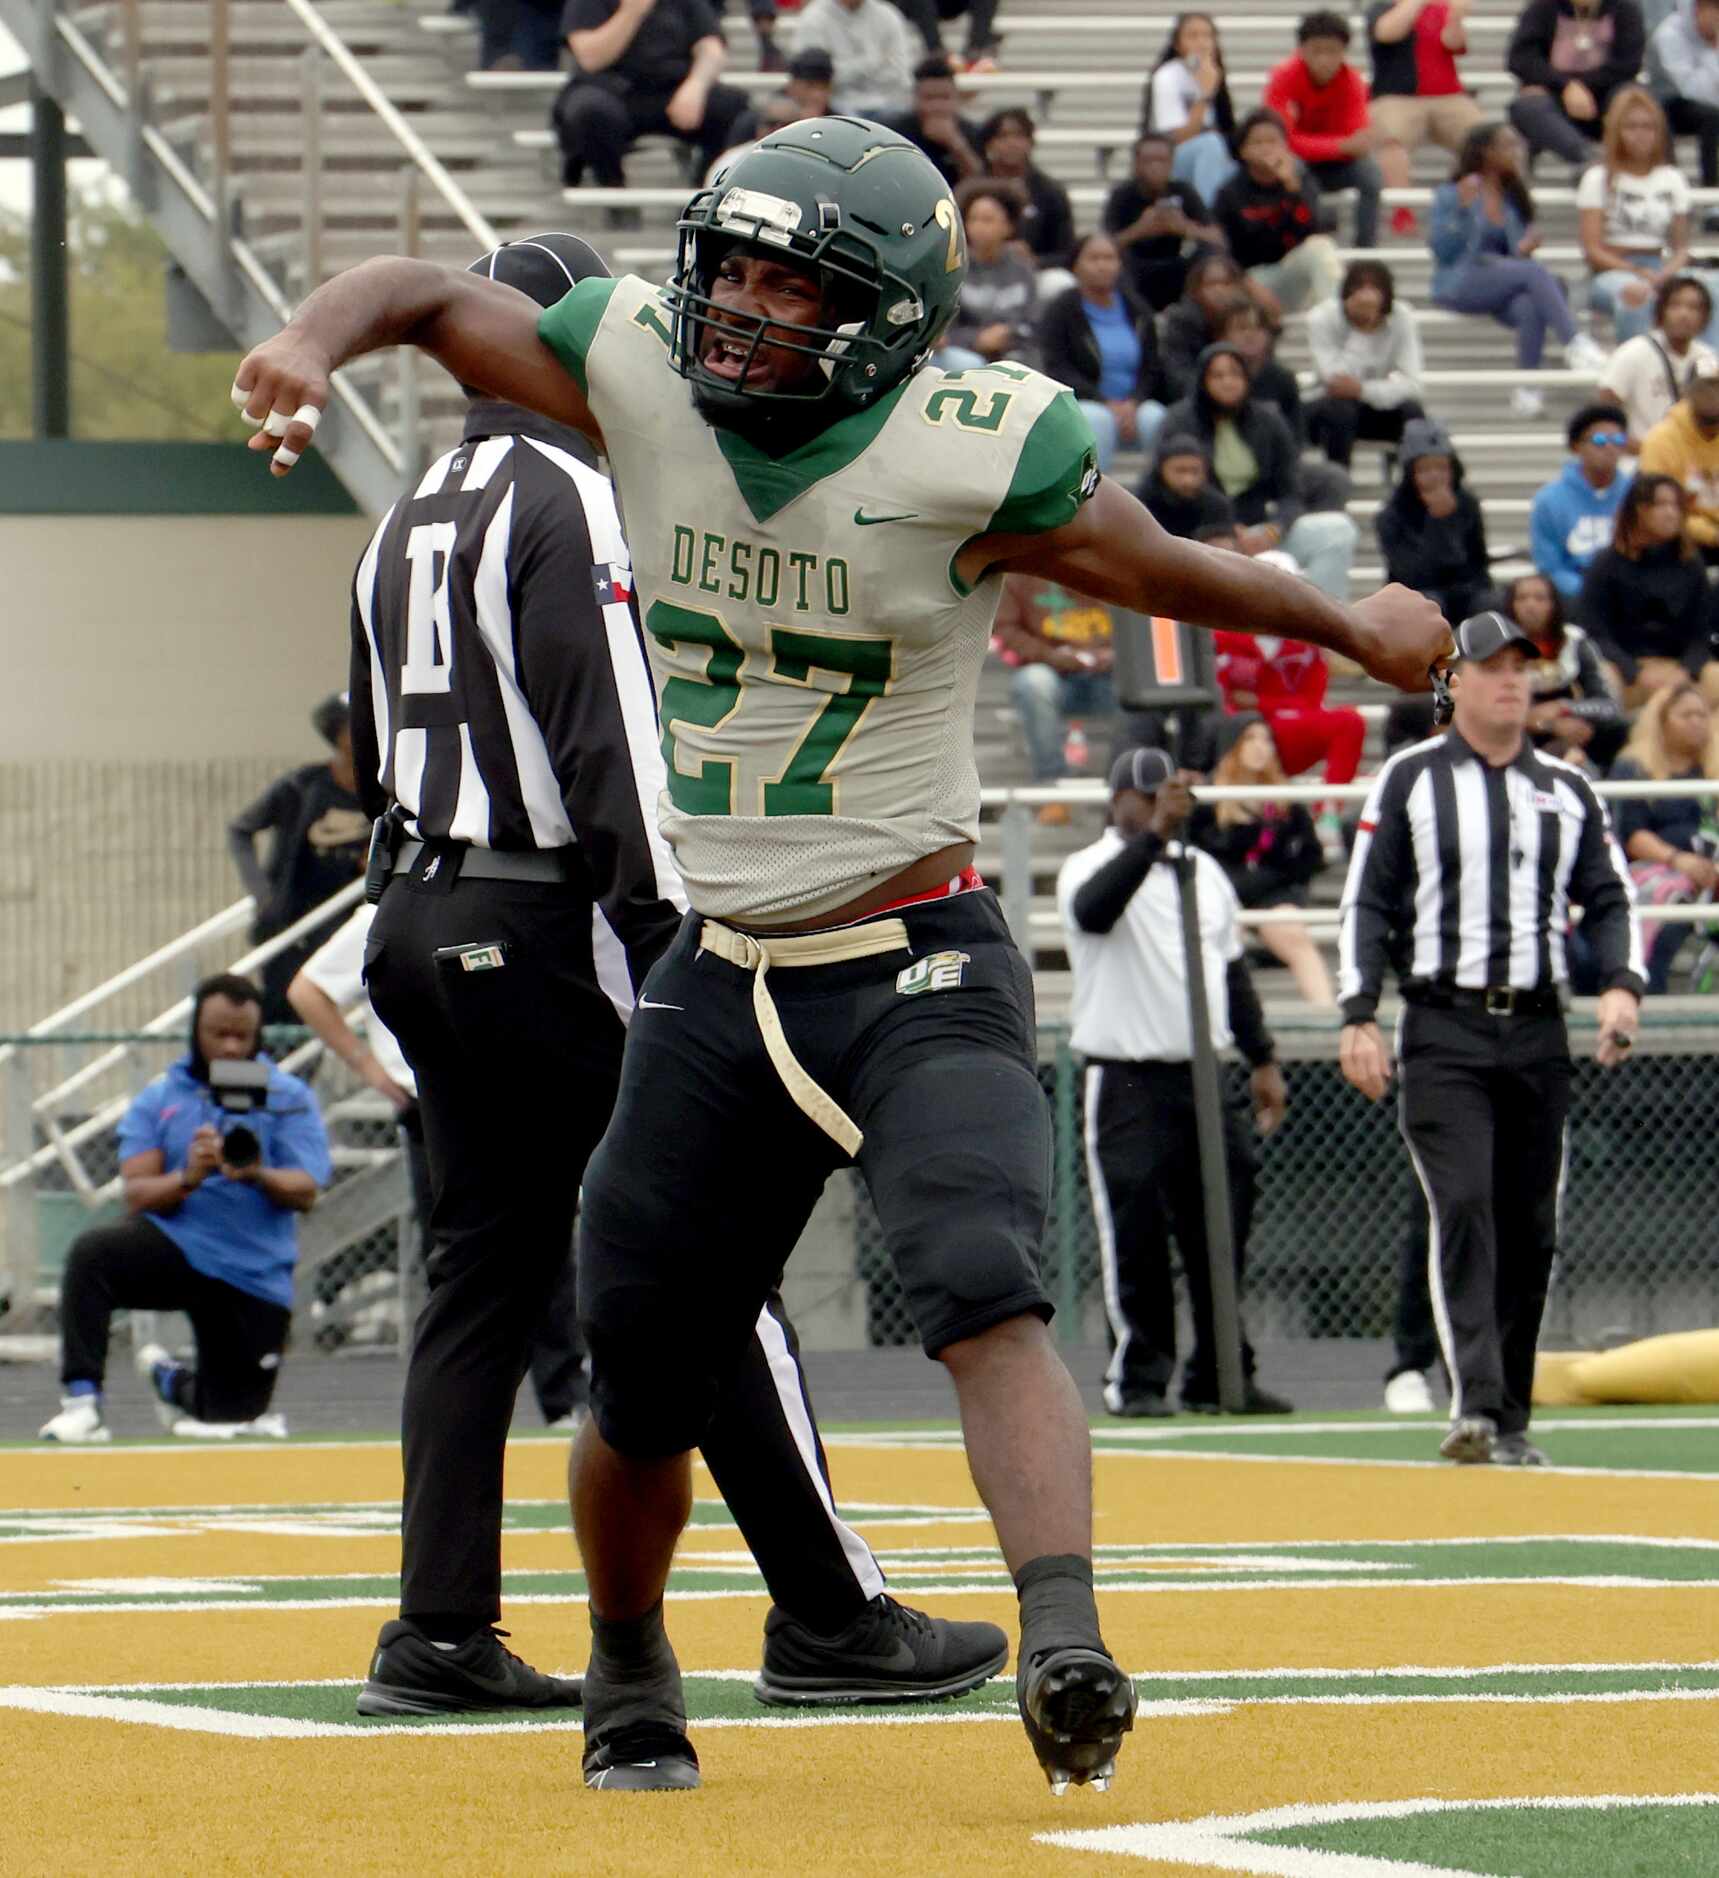 DeSoto running back Marvin Duffy (27) reacts after scoring a touchdown during first half...